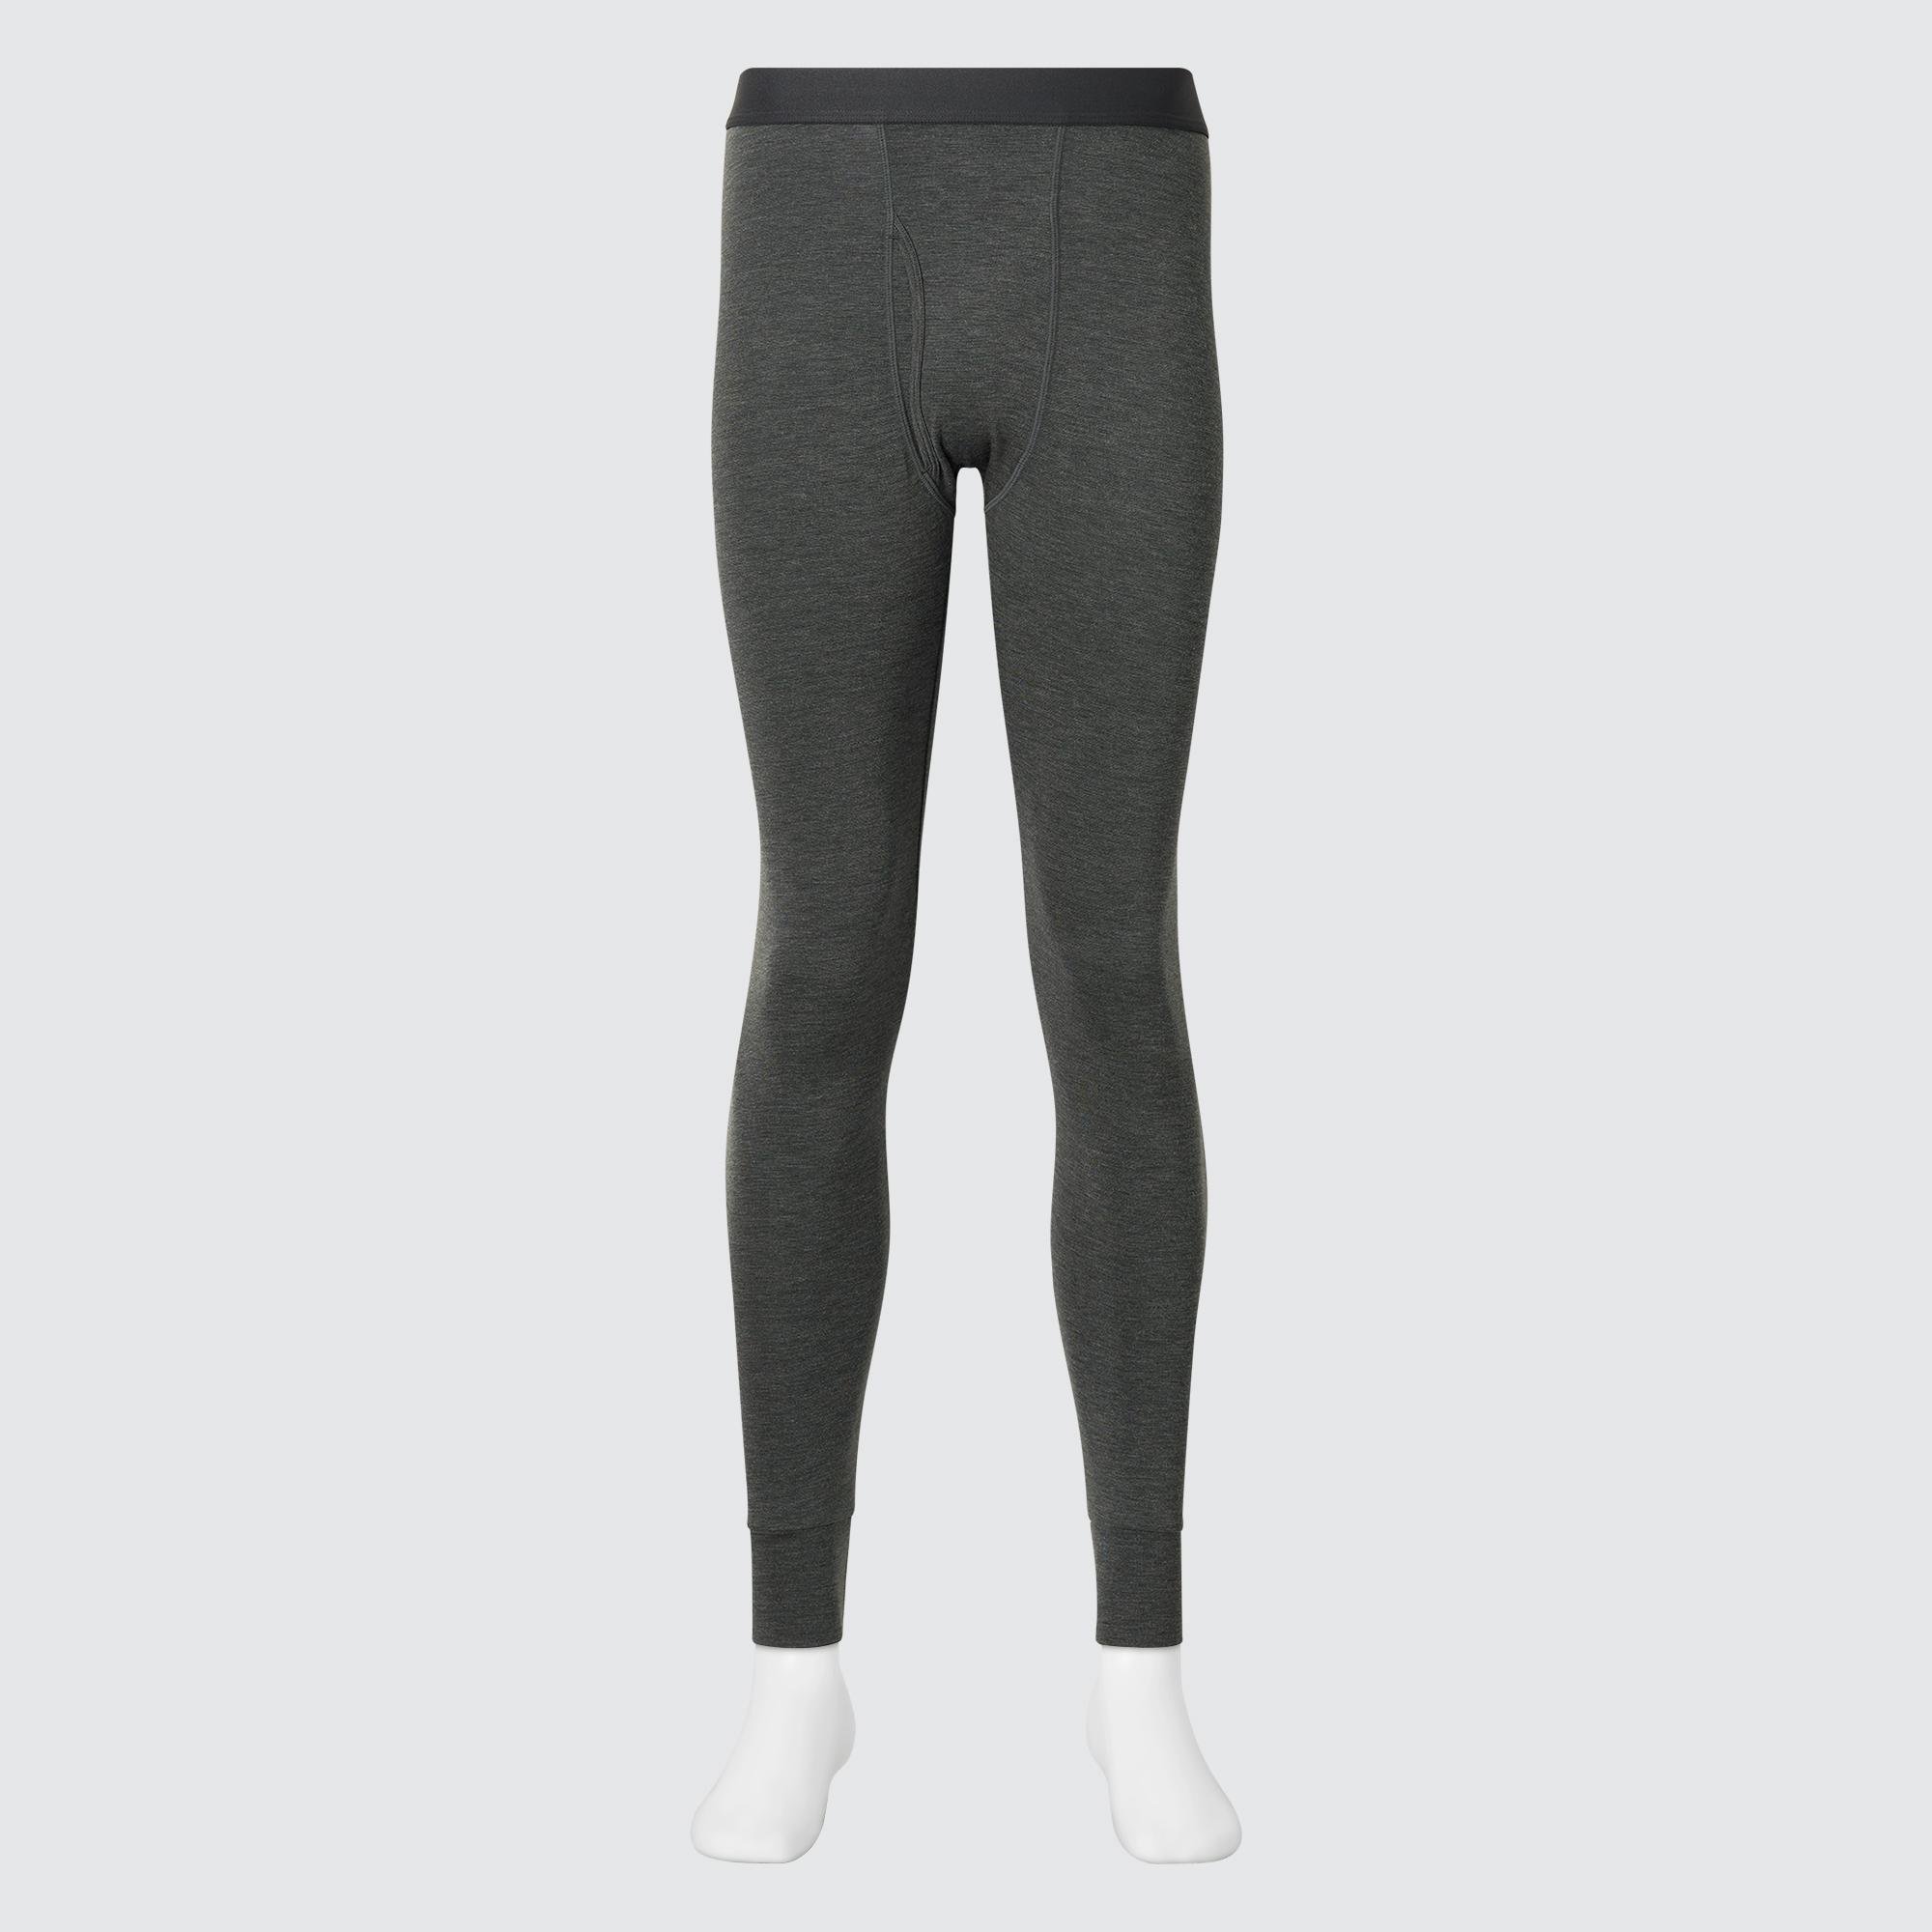 HEATTECH Tights (2021 Edition) by UNIQLO